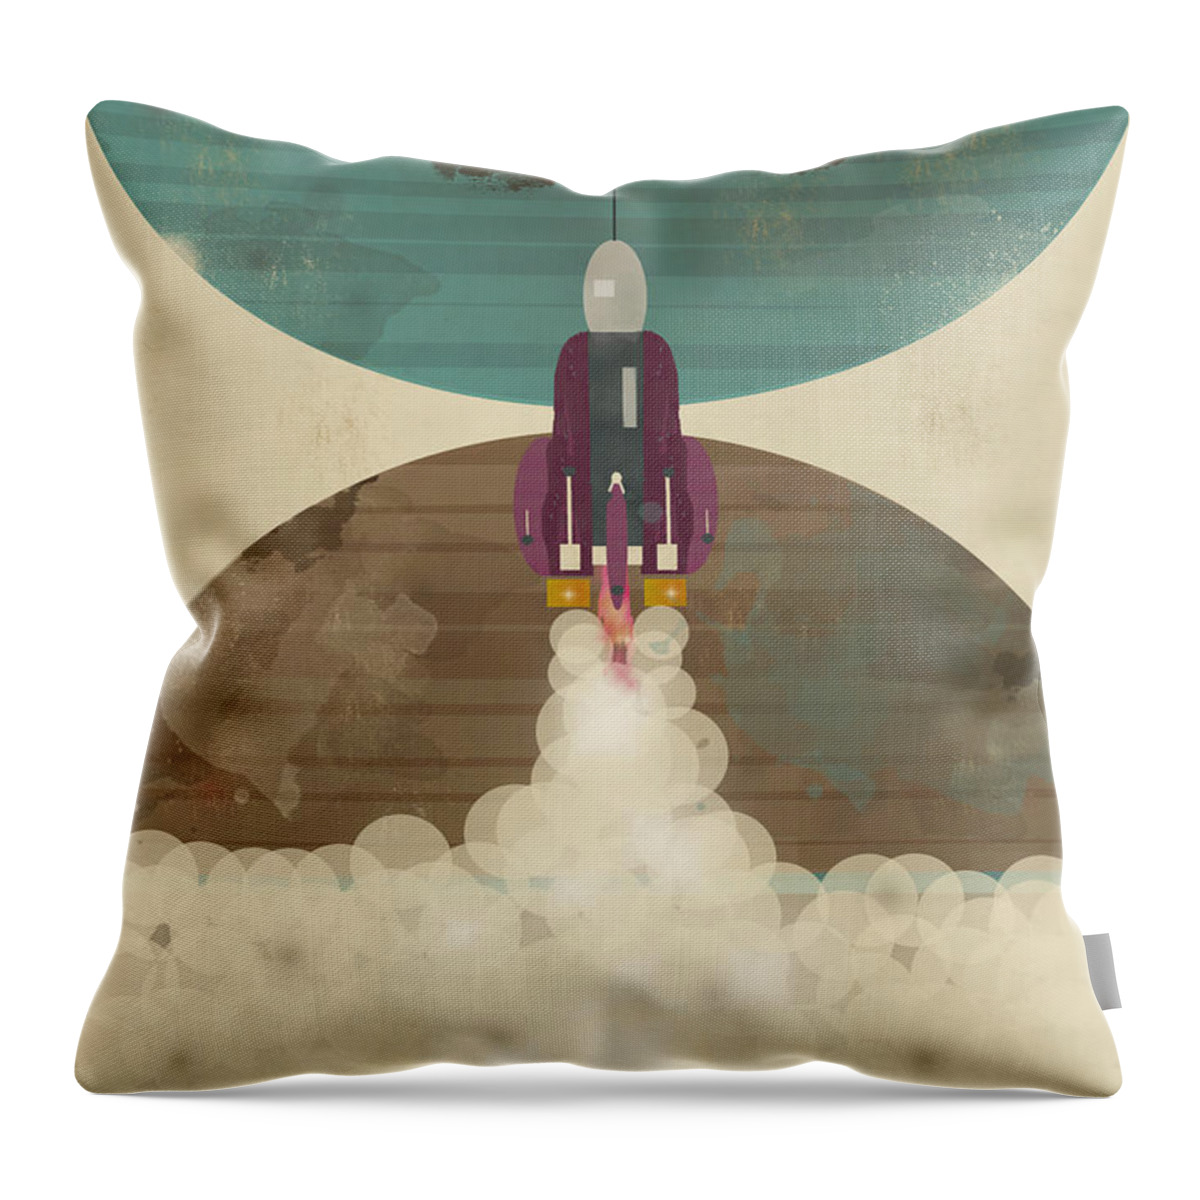 Rockets Throw Pillow featuring the painting Go Beyond by Bri Buckley